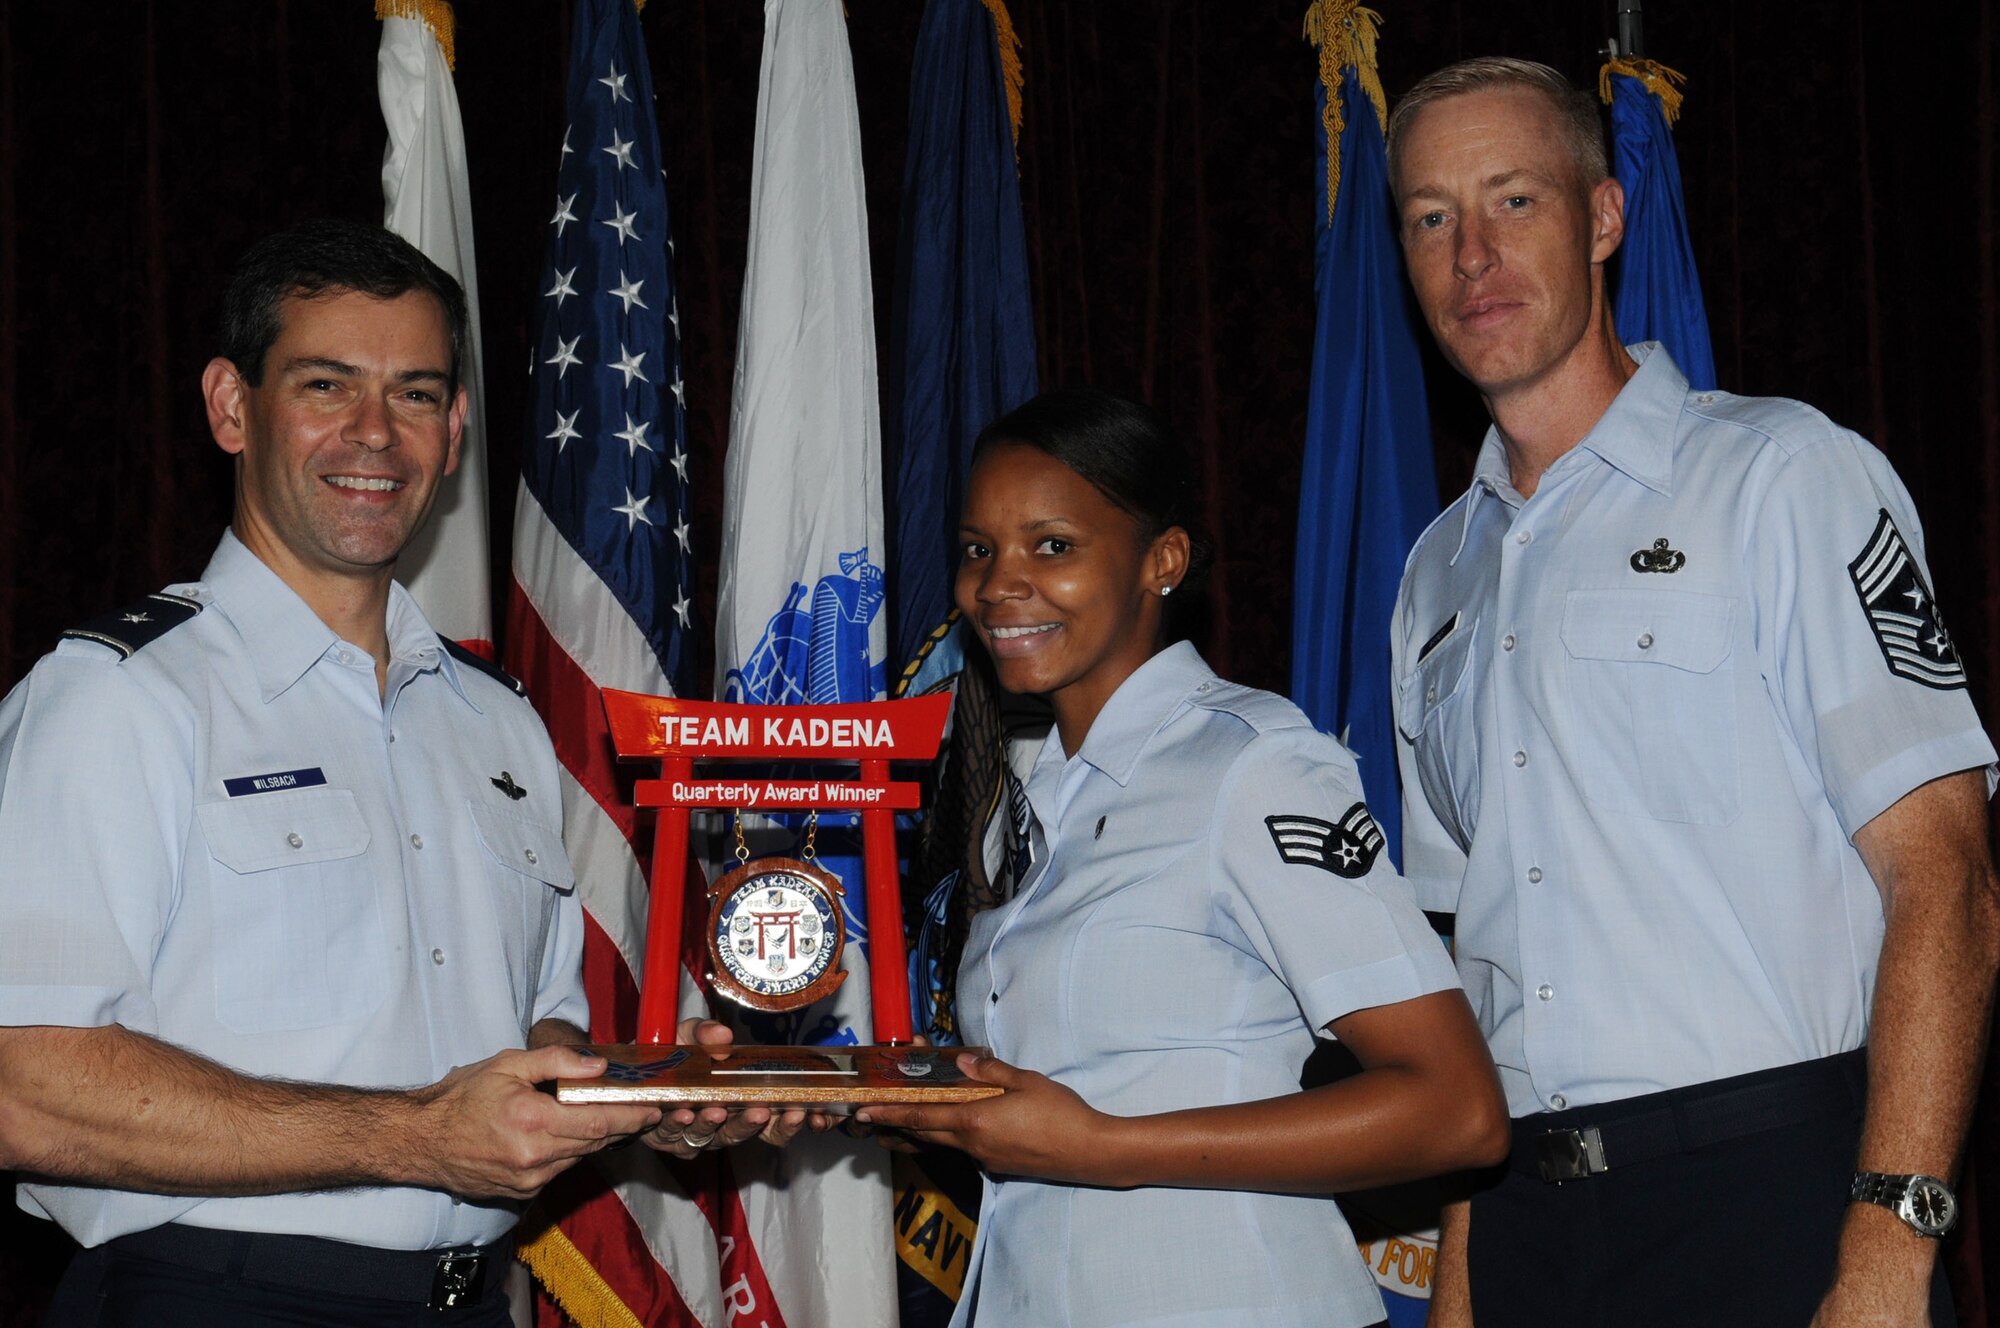 Senior Airman Michelle Williams, 353rd Special Operations
Group, was named the Team Kadena Airman of the Quarter.